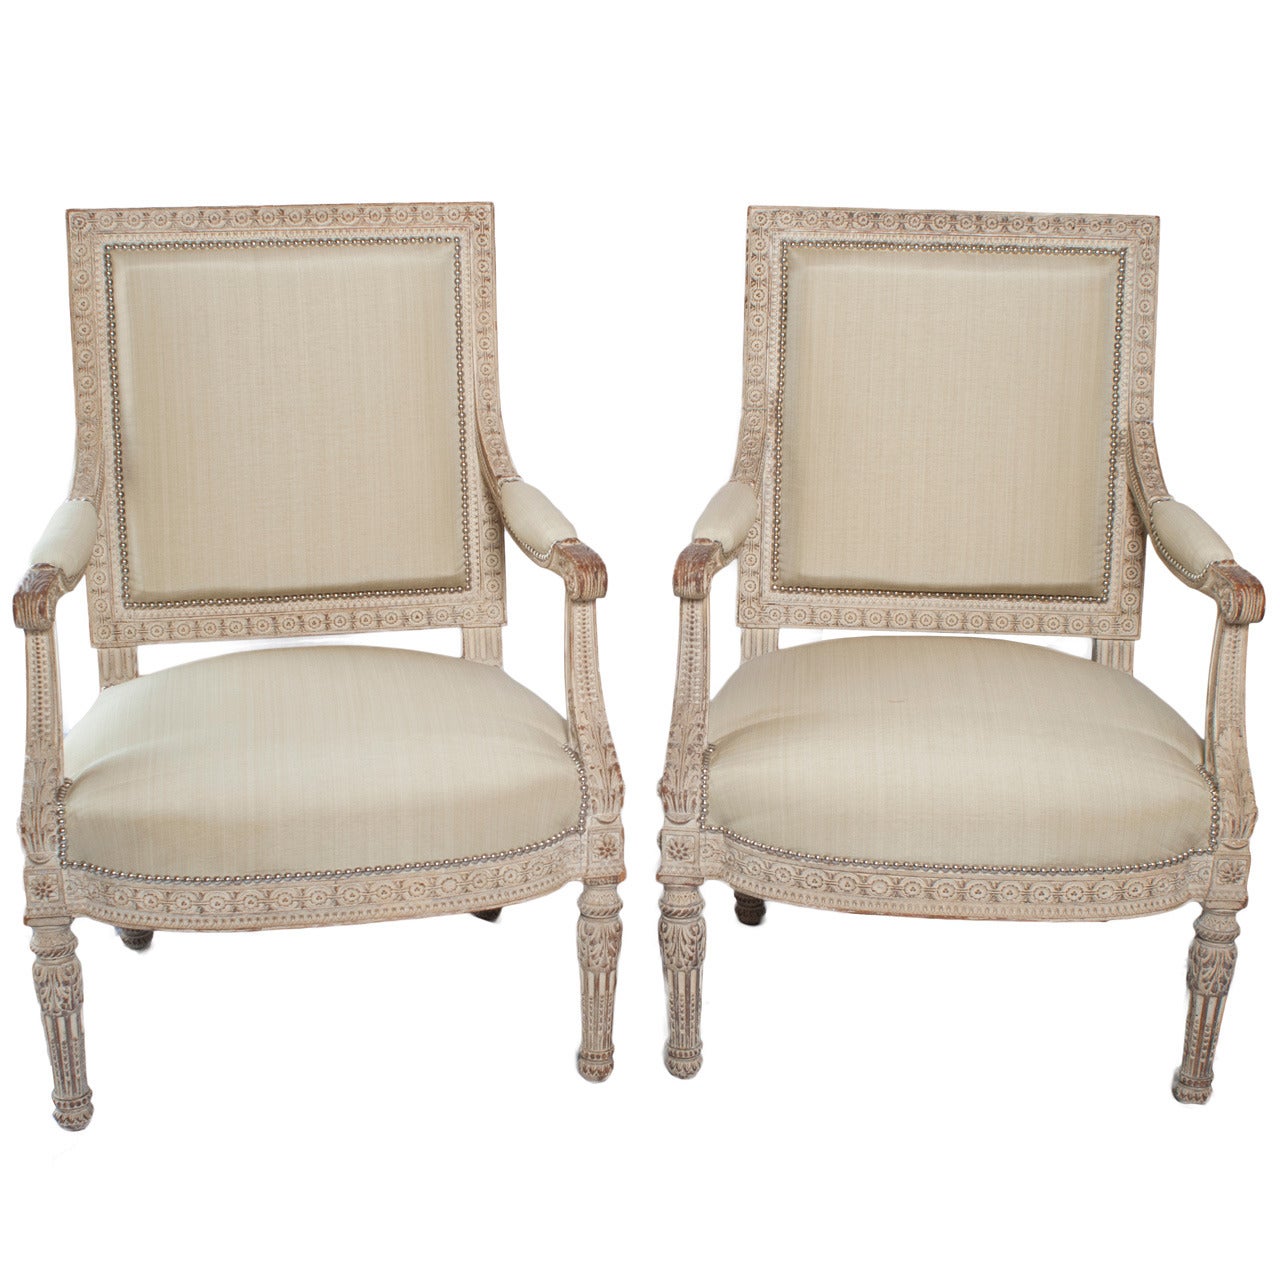 Pair of Unusual Large Square Back Louis XVI Style Fauteuils